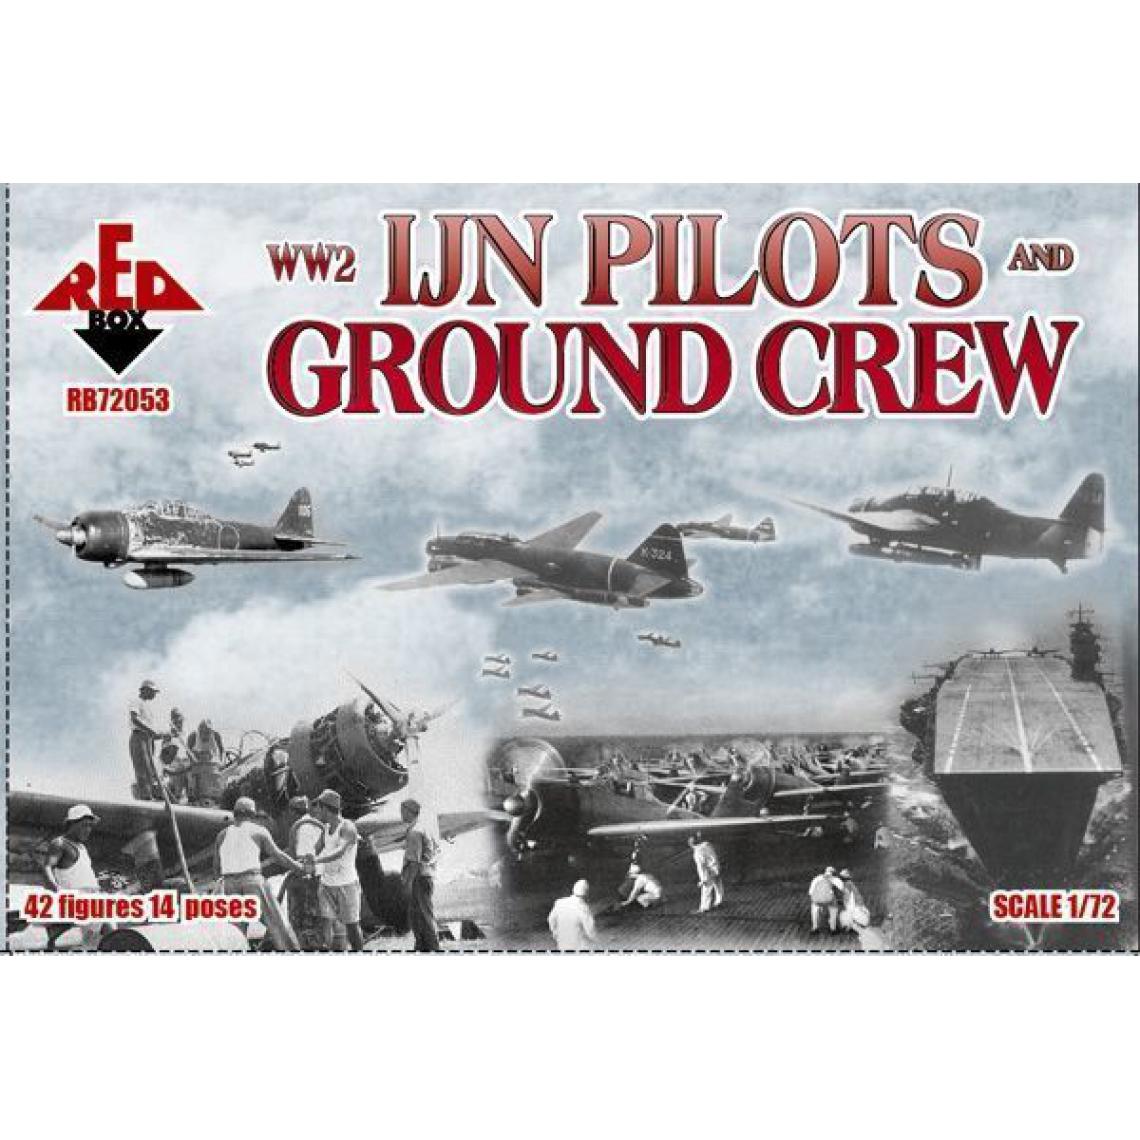 Red Box - WW2 IJN pilots and ground crew - 1:72e - Red Box - Voitures RC